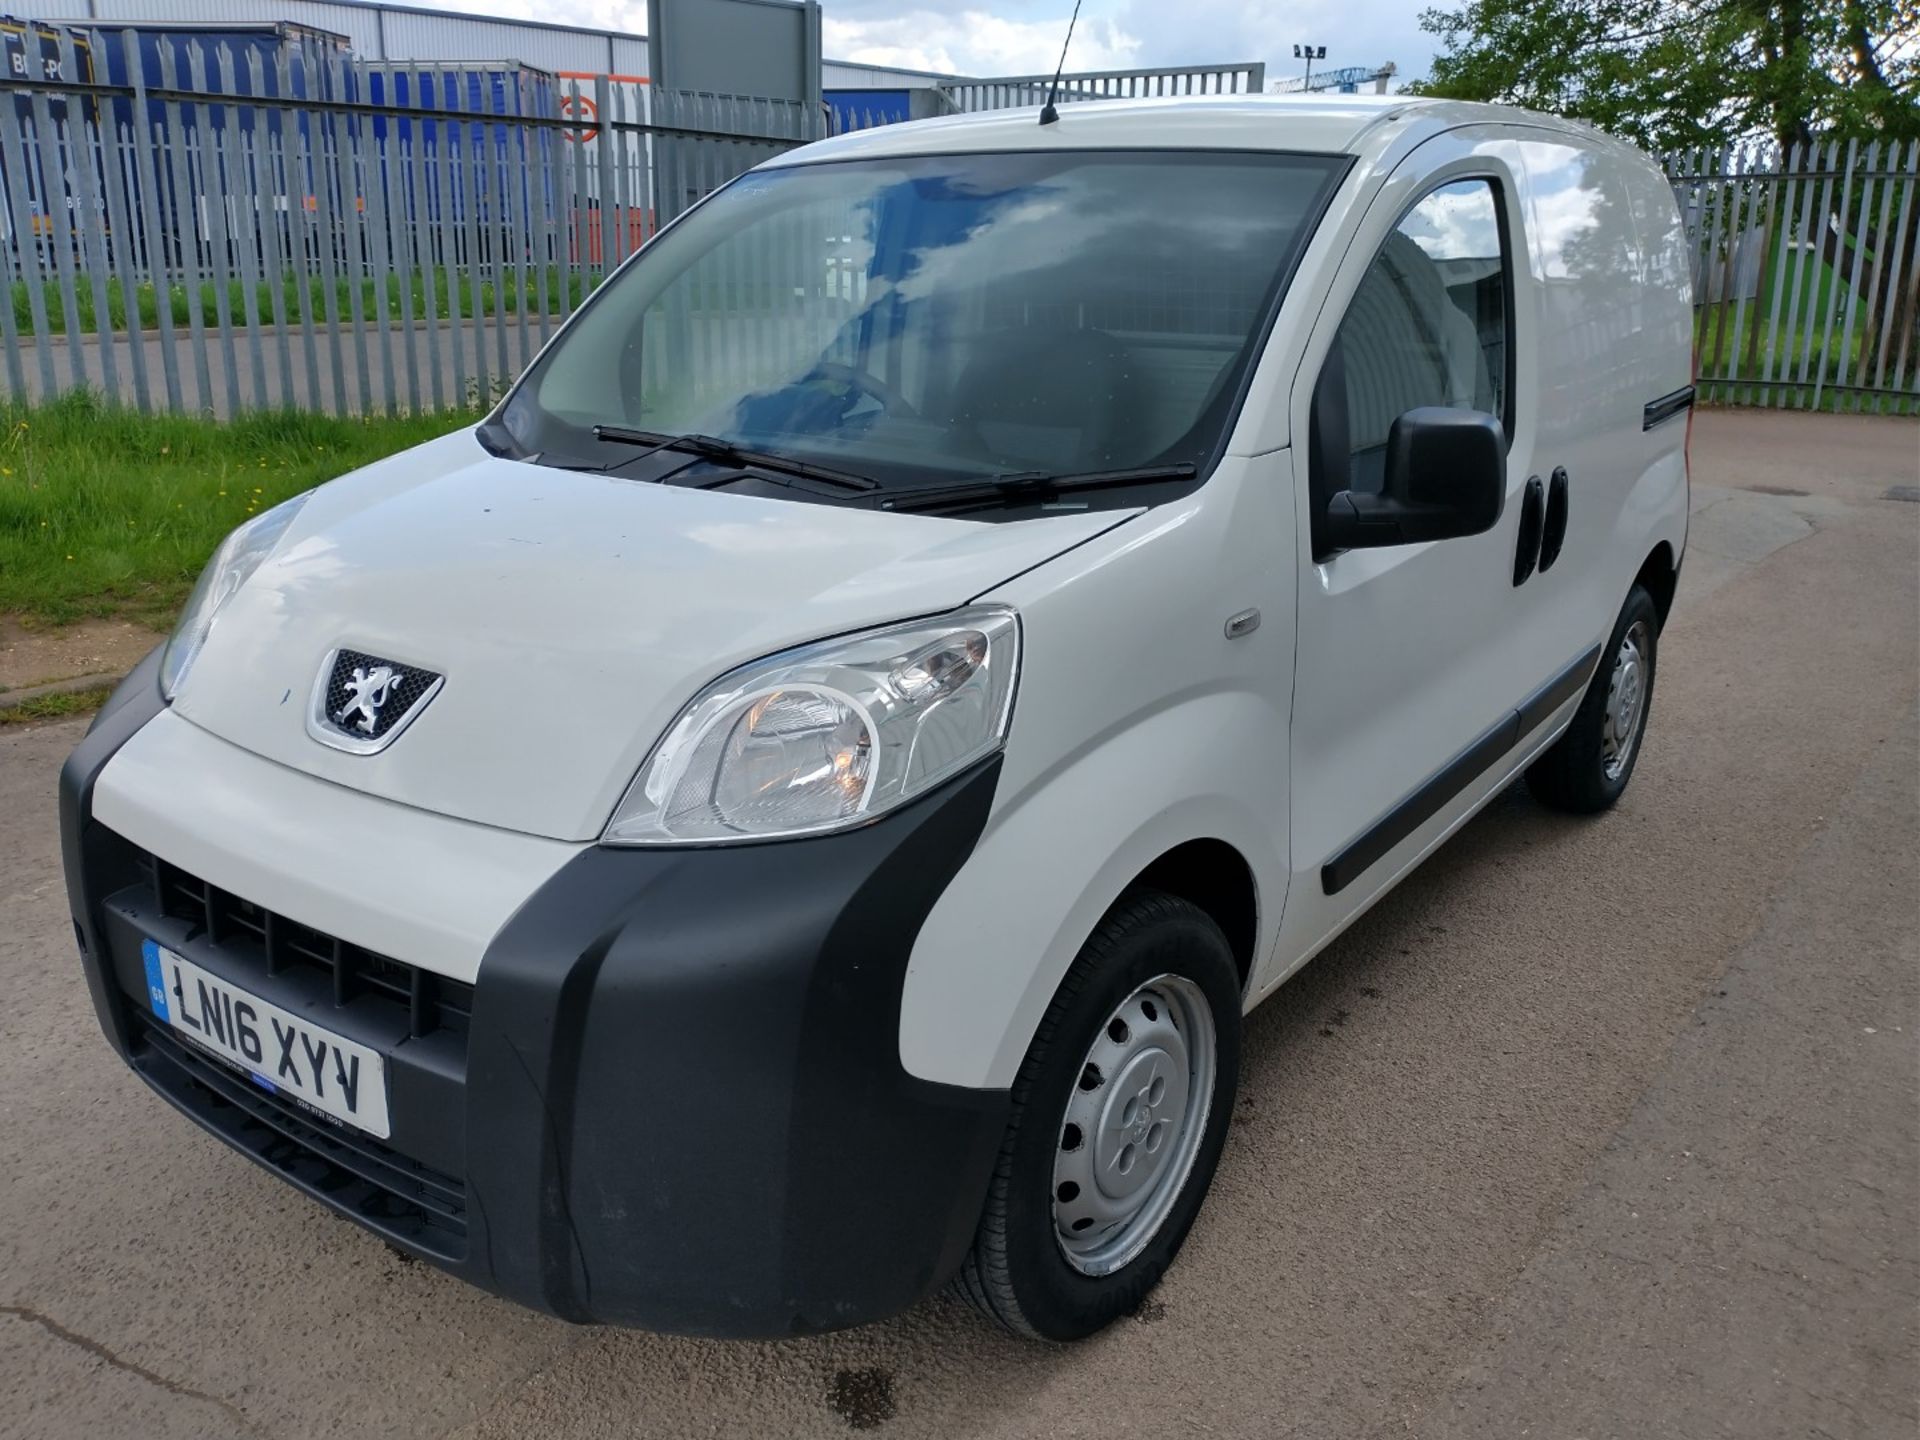 2016 Peugeot Bipper S Hdi Panel van - CL505 - Location: Corby